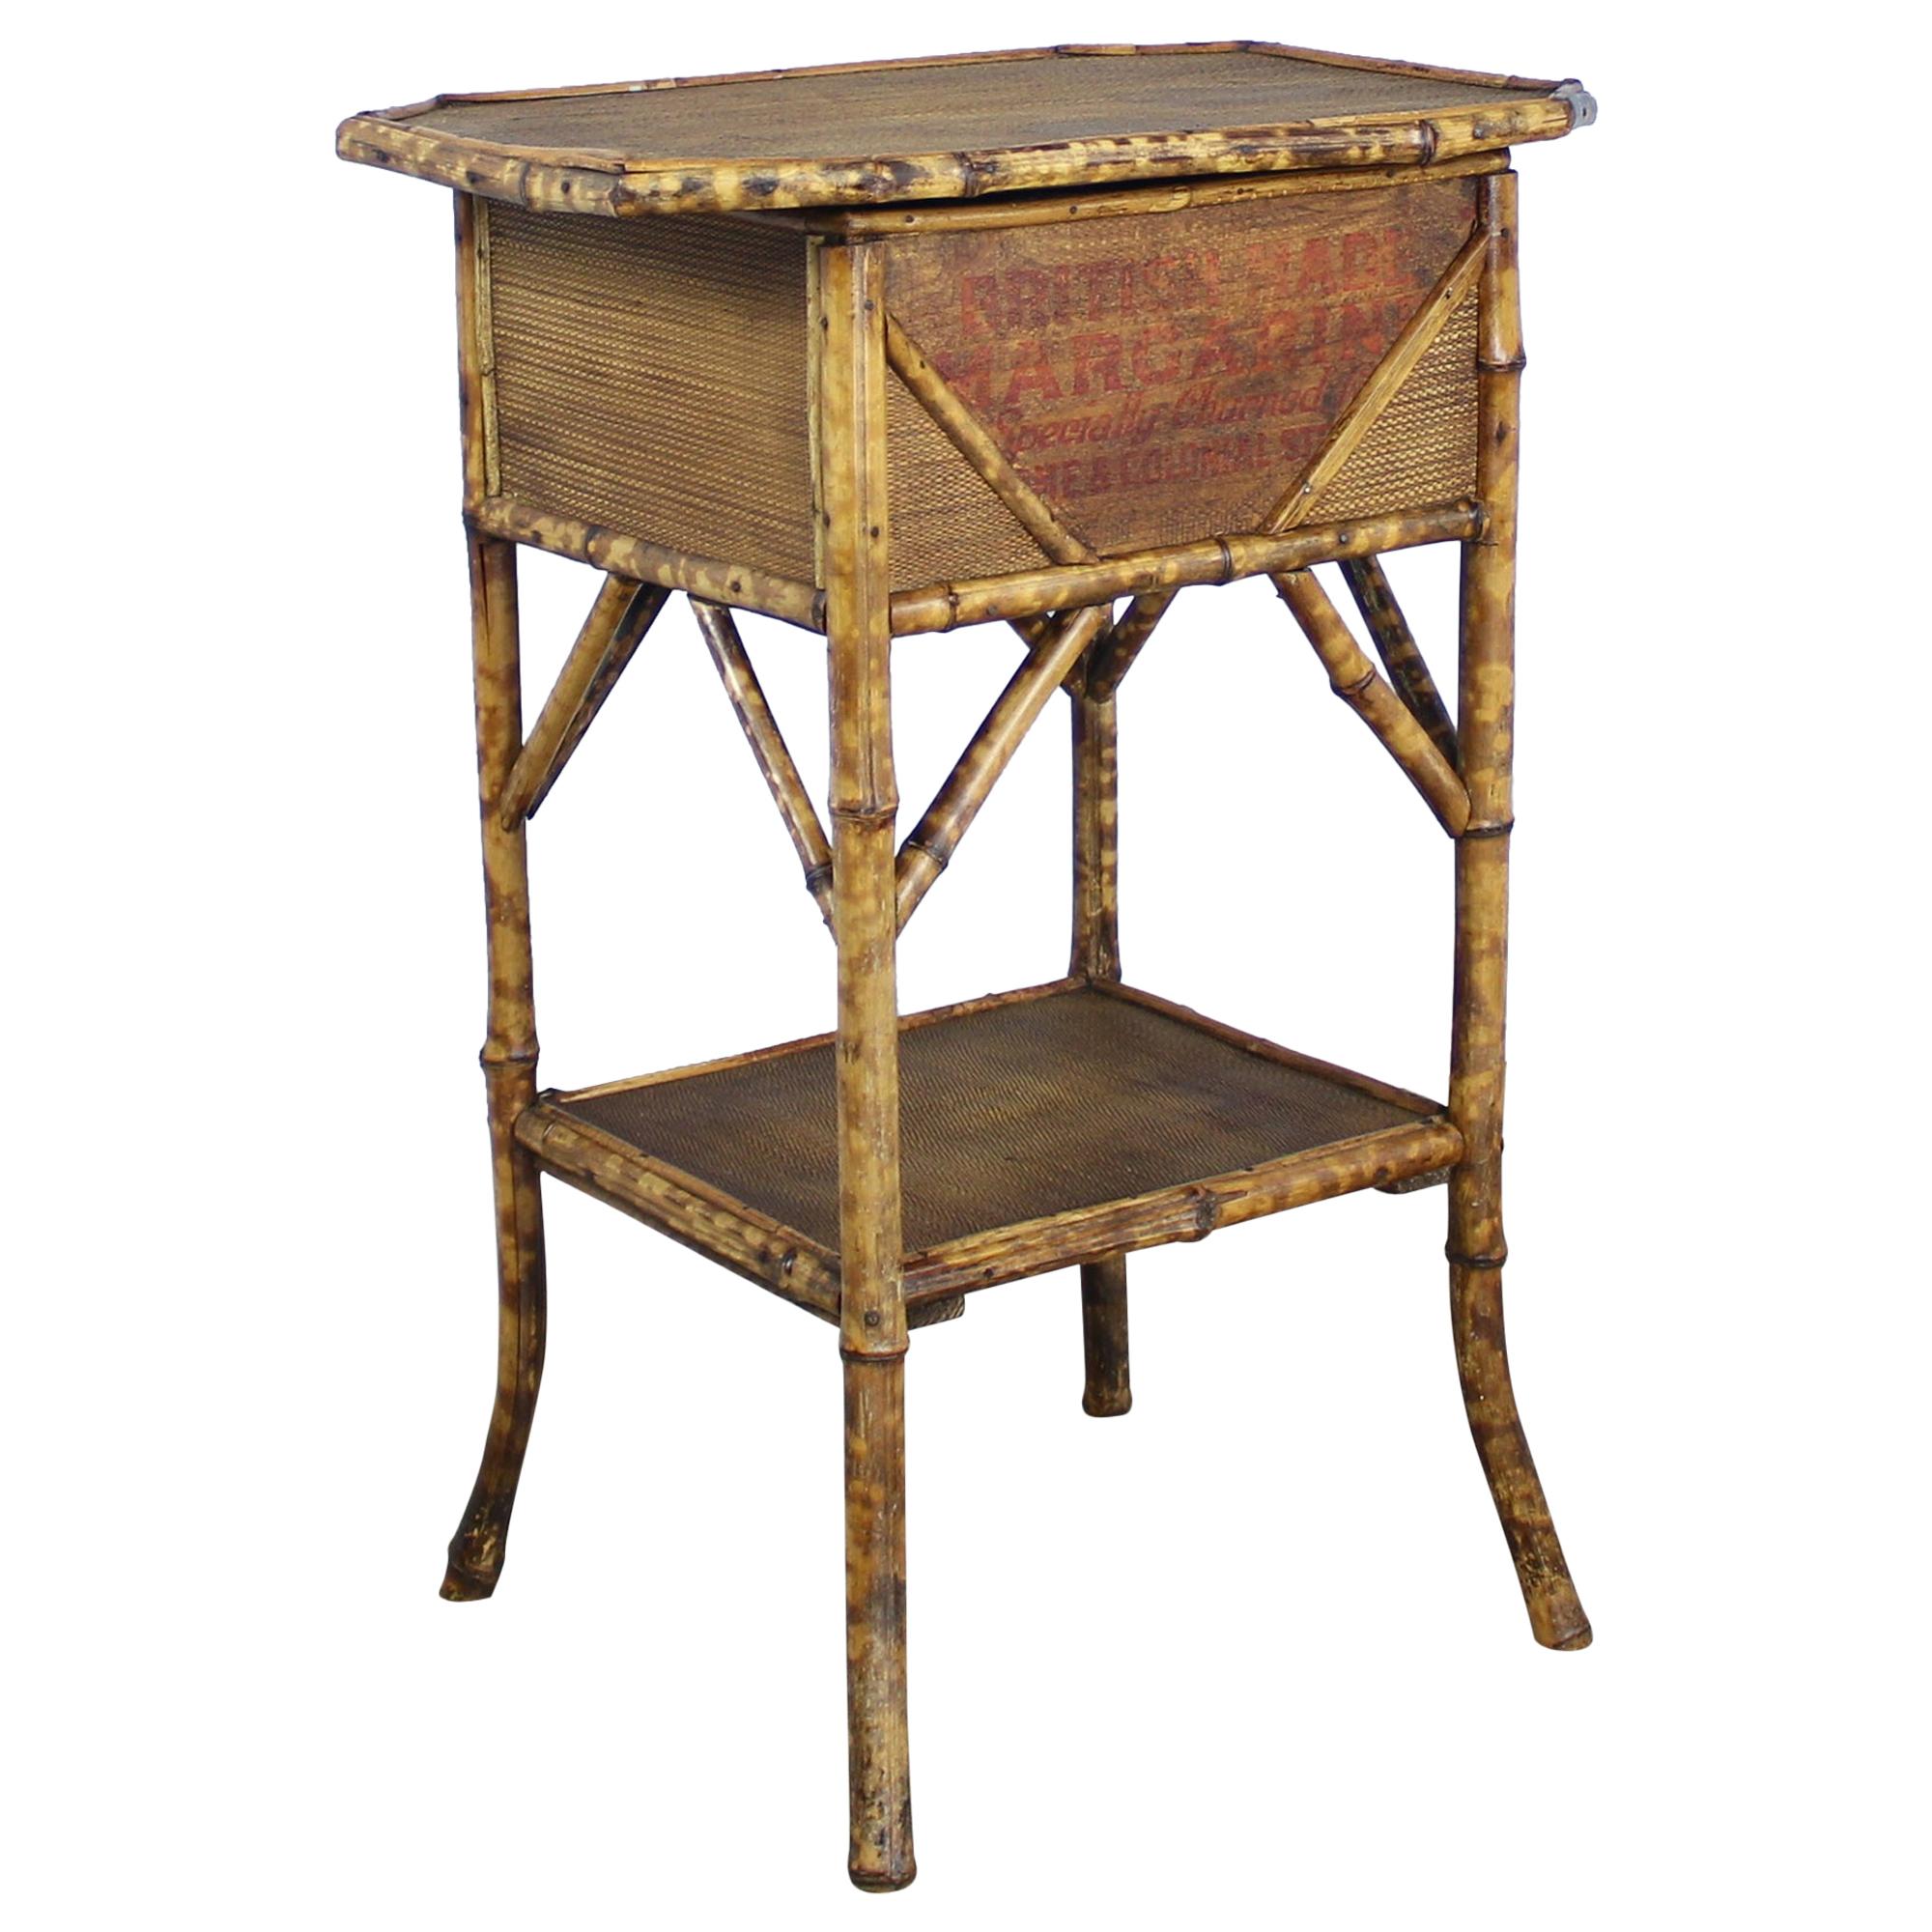 Antique Bamboo Sewing Table - 6 For Sale on 1stDibs